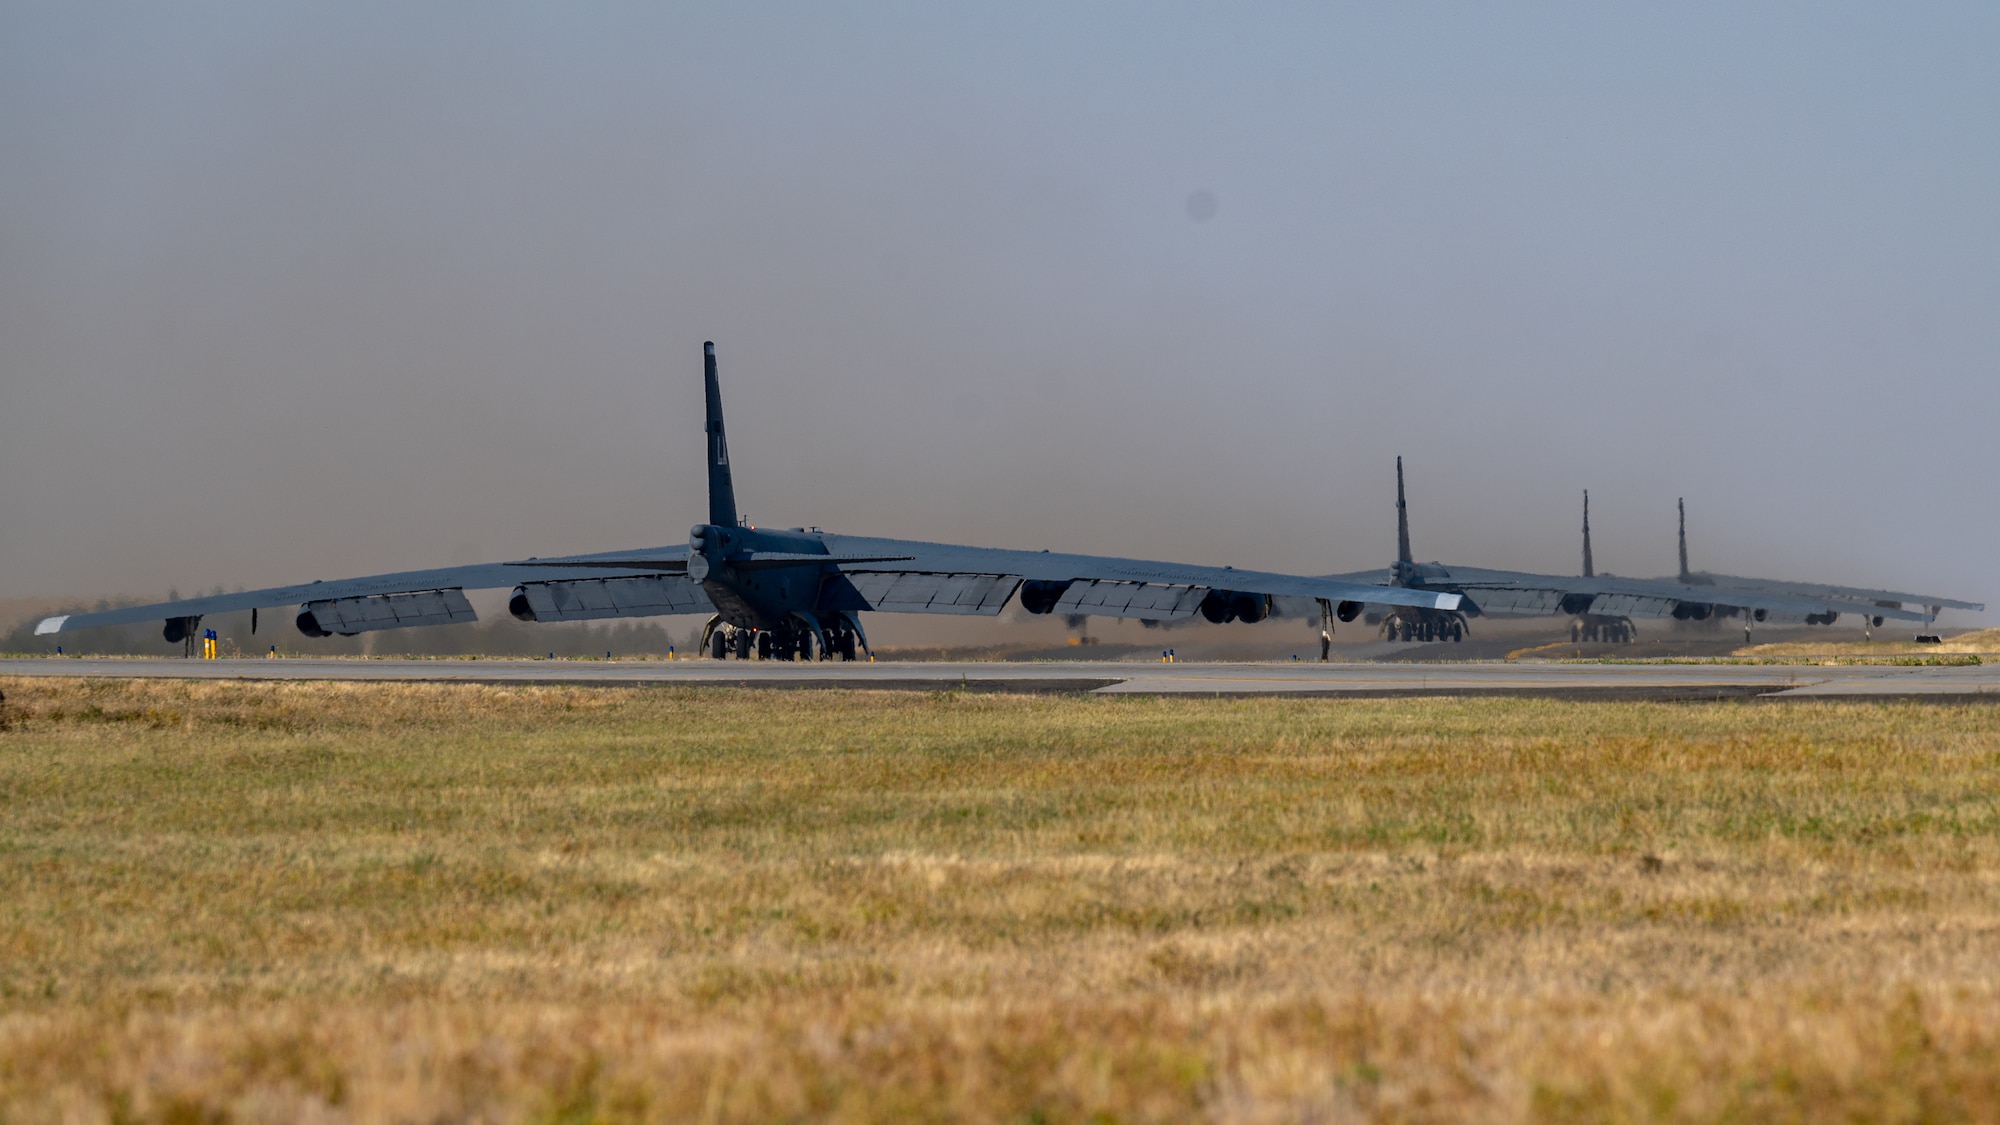 Four B-52H Stratofortresses taxi down the runway during an Agile Combat Employment exercise at Fairchild Air Force Base, Washington, Aug. 18, 2022. This exercise marks the first time the B-52 has operated out of Fairchild since 2010. (U.S. Air Force photo by Senior Airman Chase Sullivan)